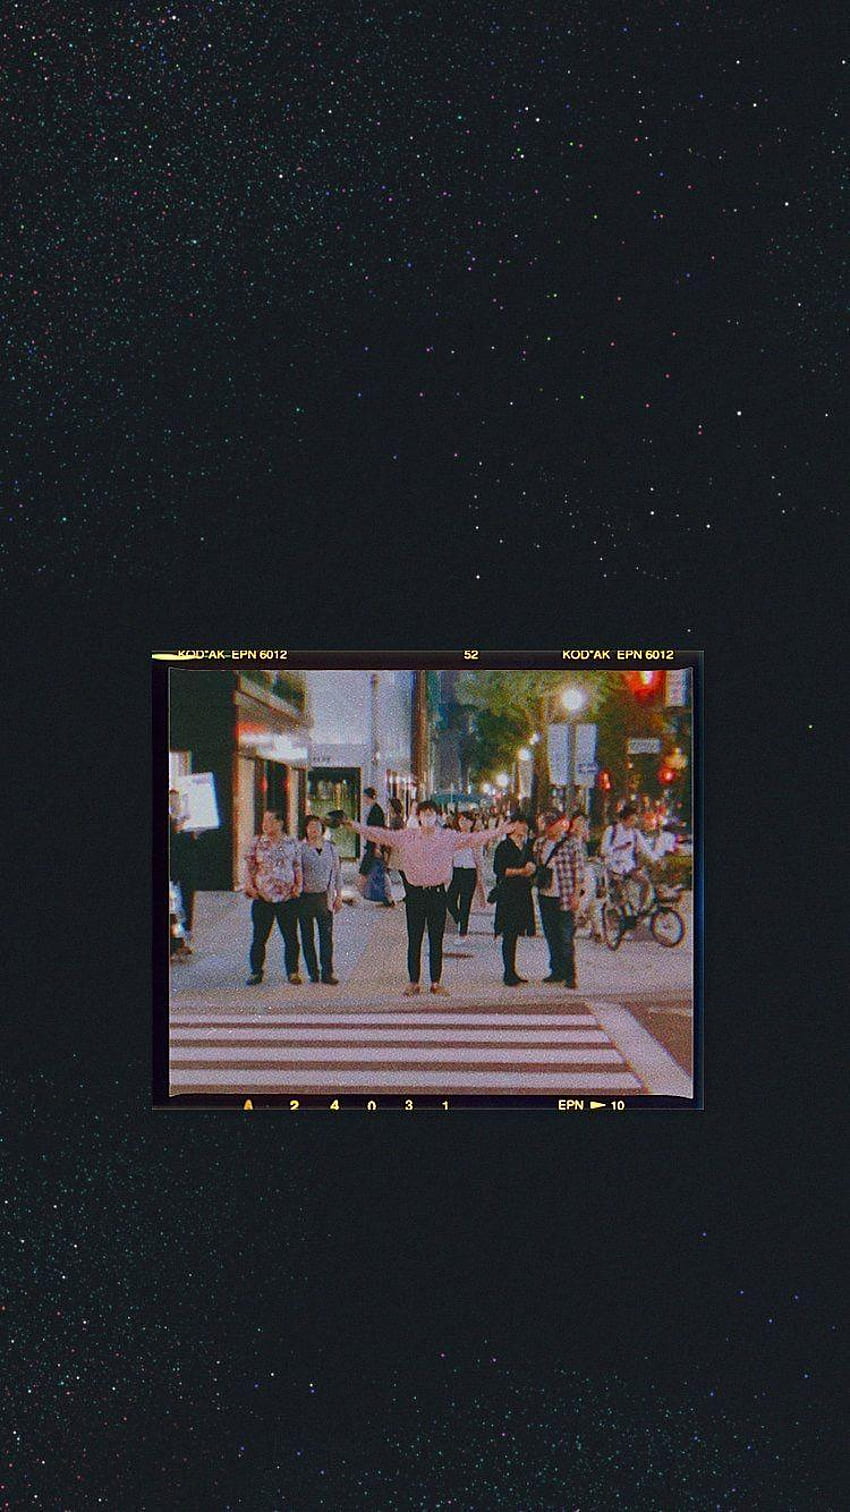 A group of people walking down a street at night - Grunge, vintage, BTS